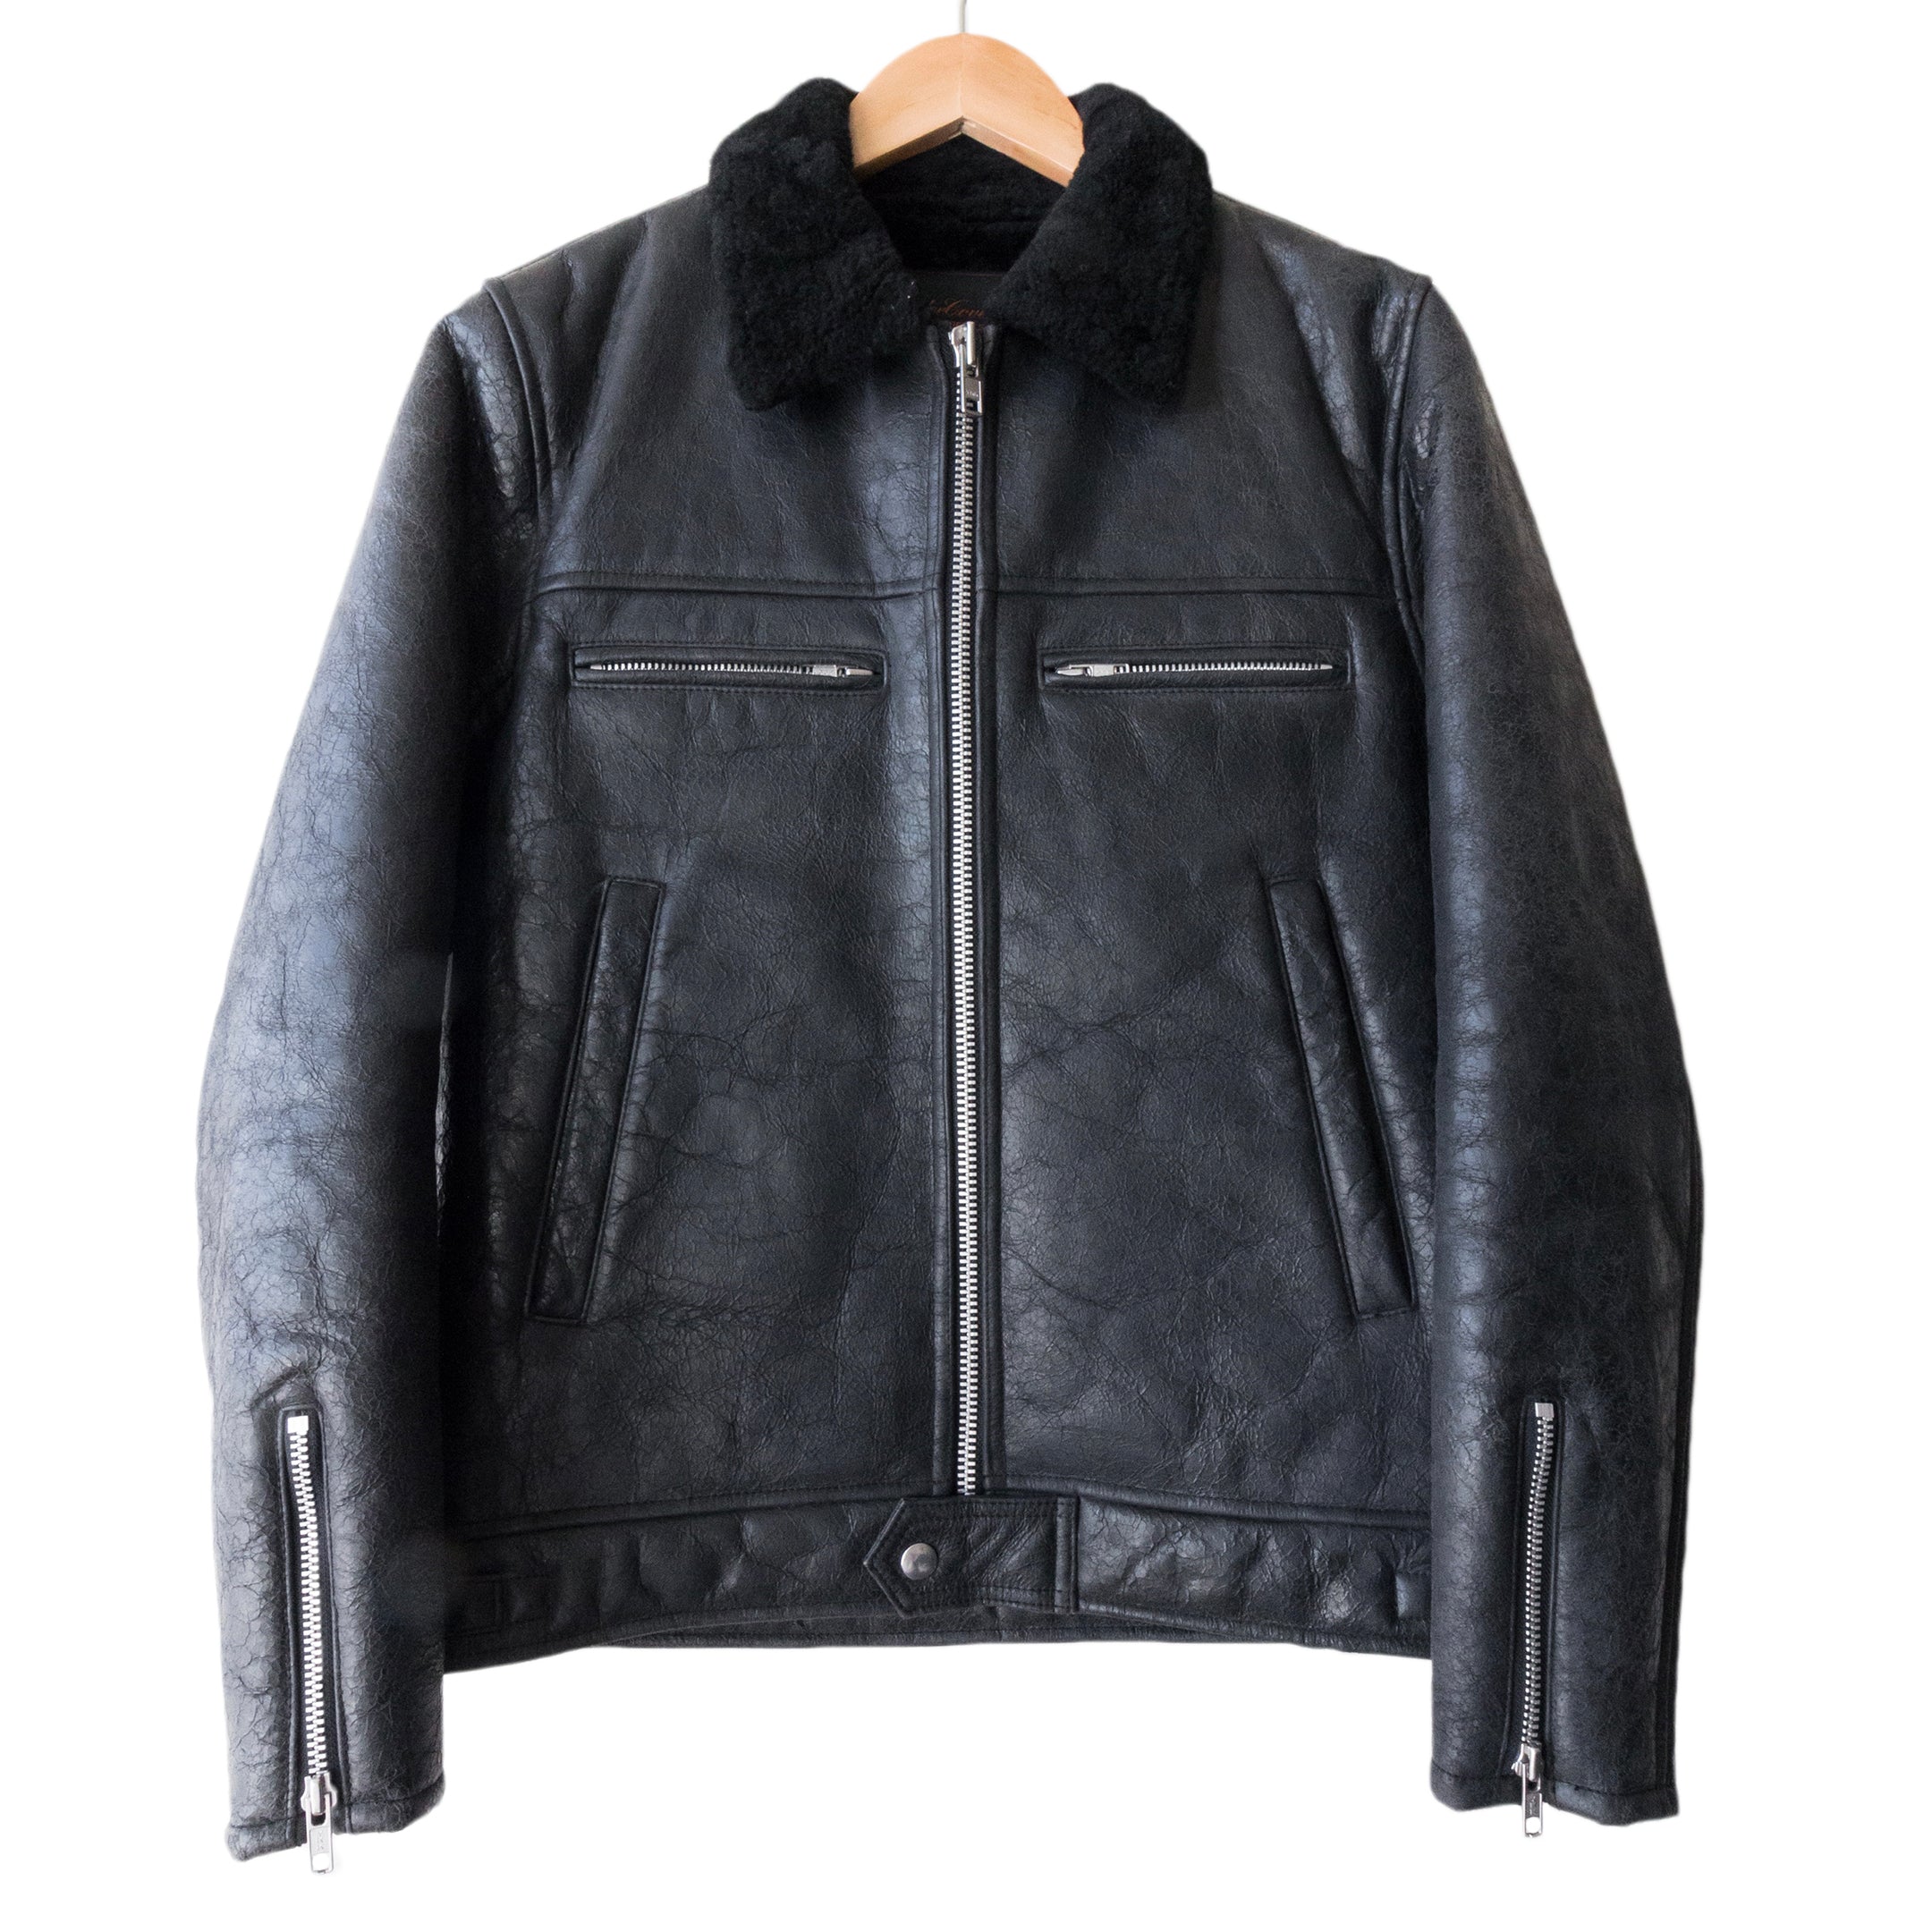 Undercover Cracked Shearling Jacket - AW02 